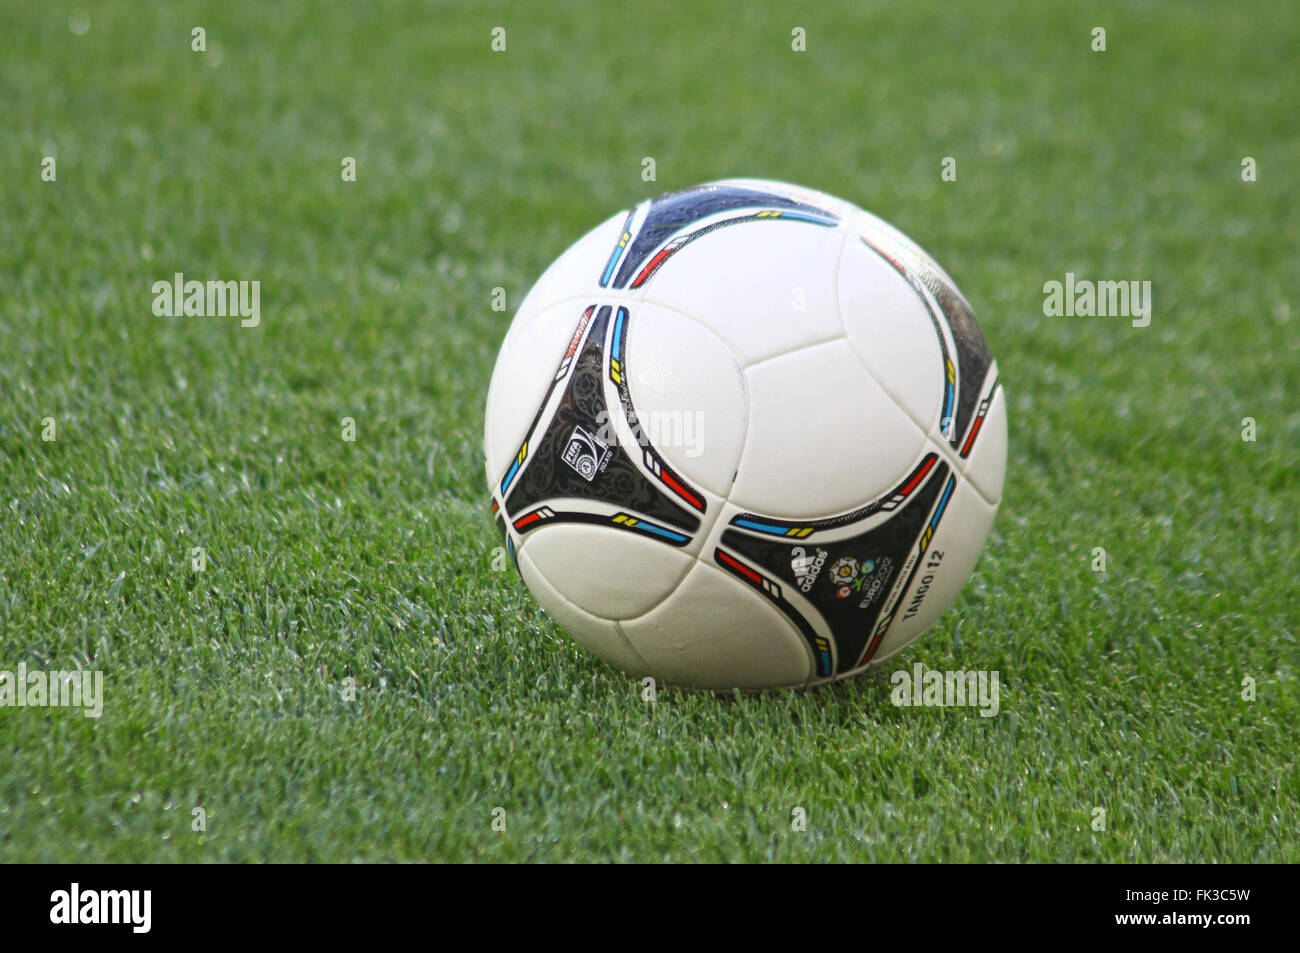 KYIV, UKRAINE - MAY 10, 2012: Close-up official UEFA European 2012 Championship (EURO 2012) ball on the grass during the game be Stock Photo